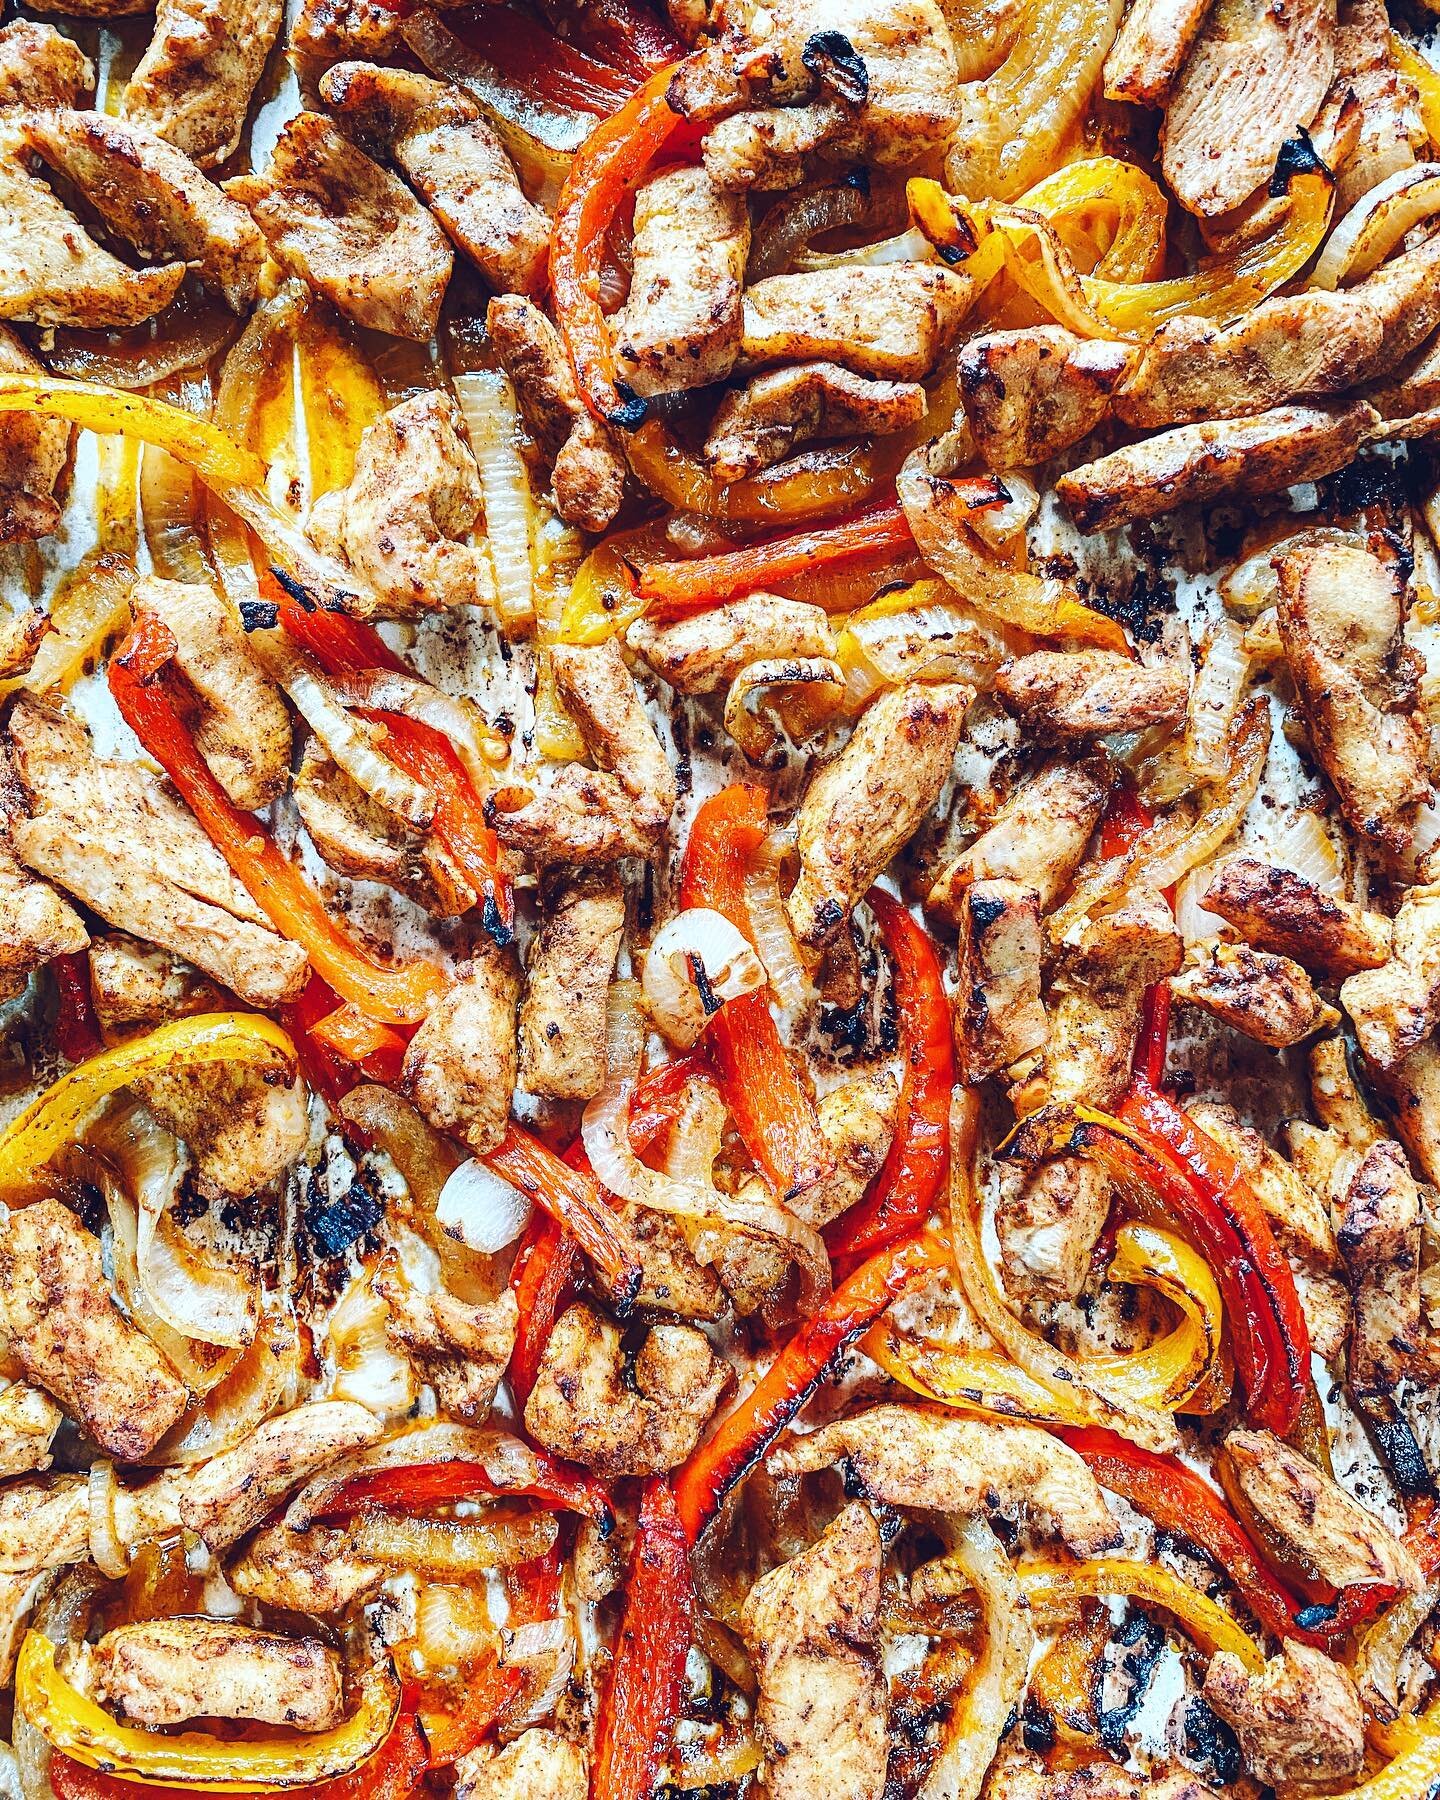 These sheet pan chicken fajitas are a new family fave. To make them, thinly slice bell peppers, onions and boneless/skinless chicken breasts or thighs (3 peppers, 2 onions, 1.5 lbs chicken), toss with a generous glug or three of olive oil, a few tabl